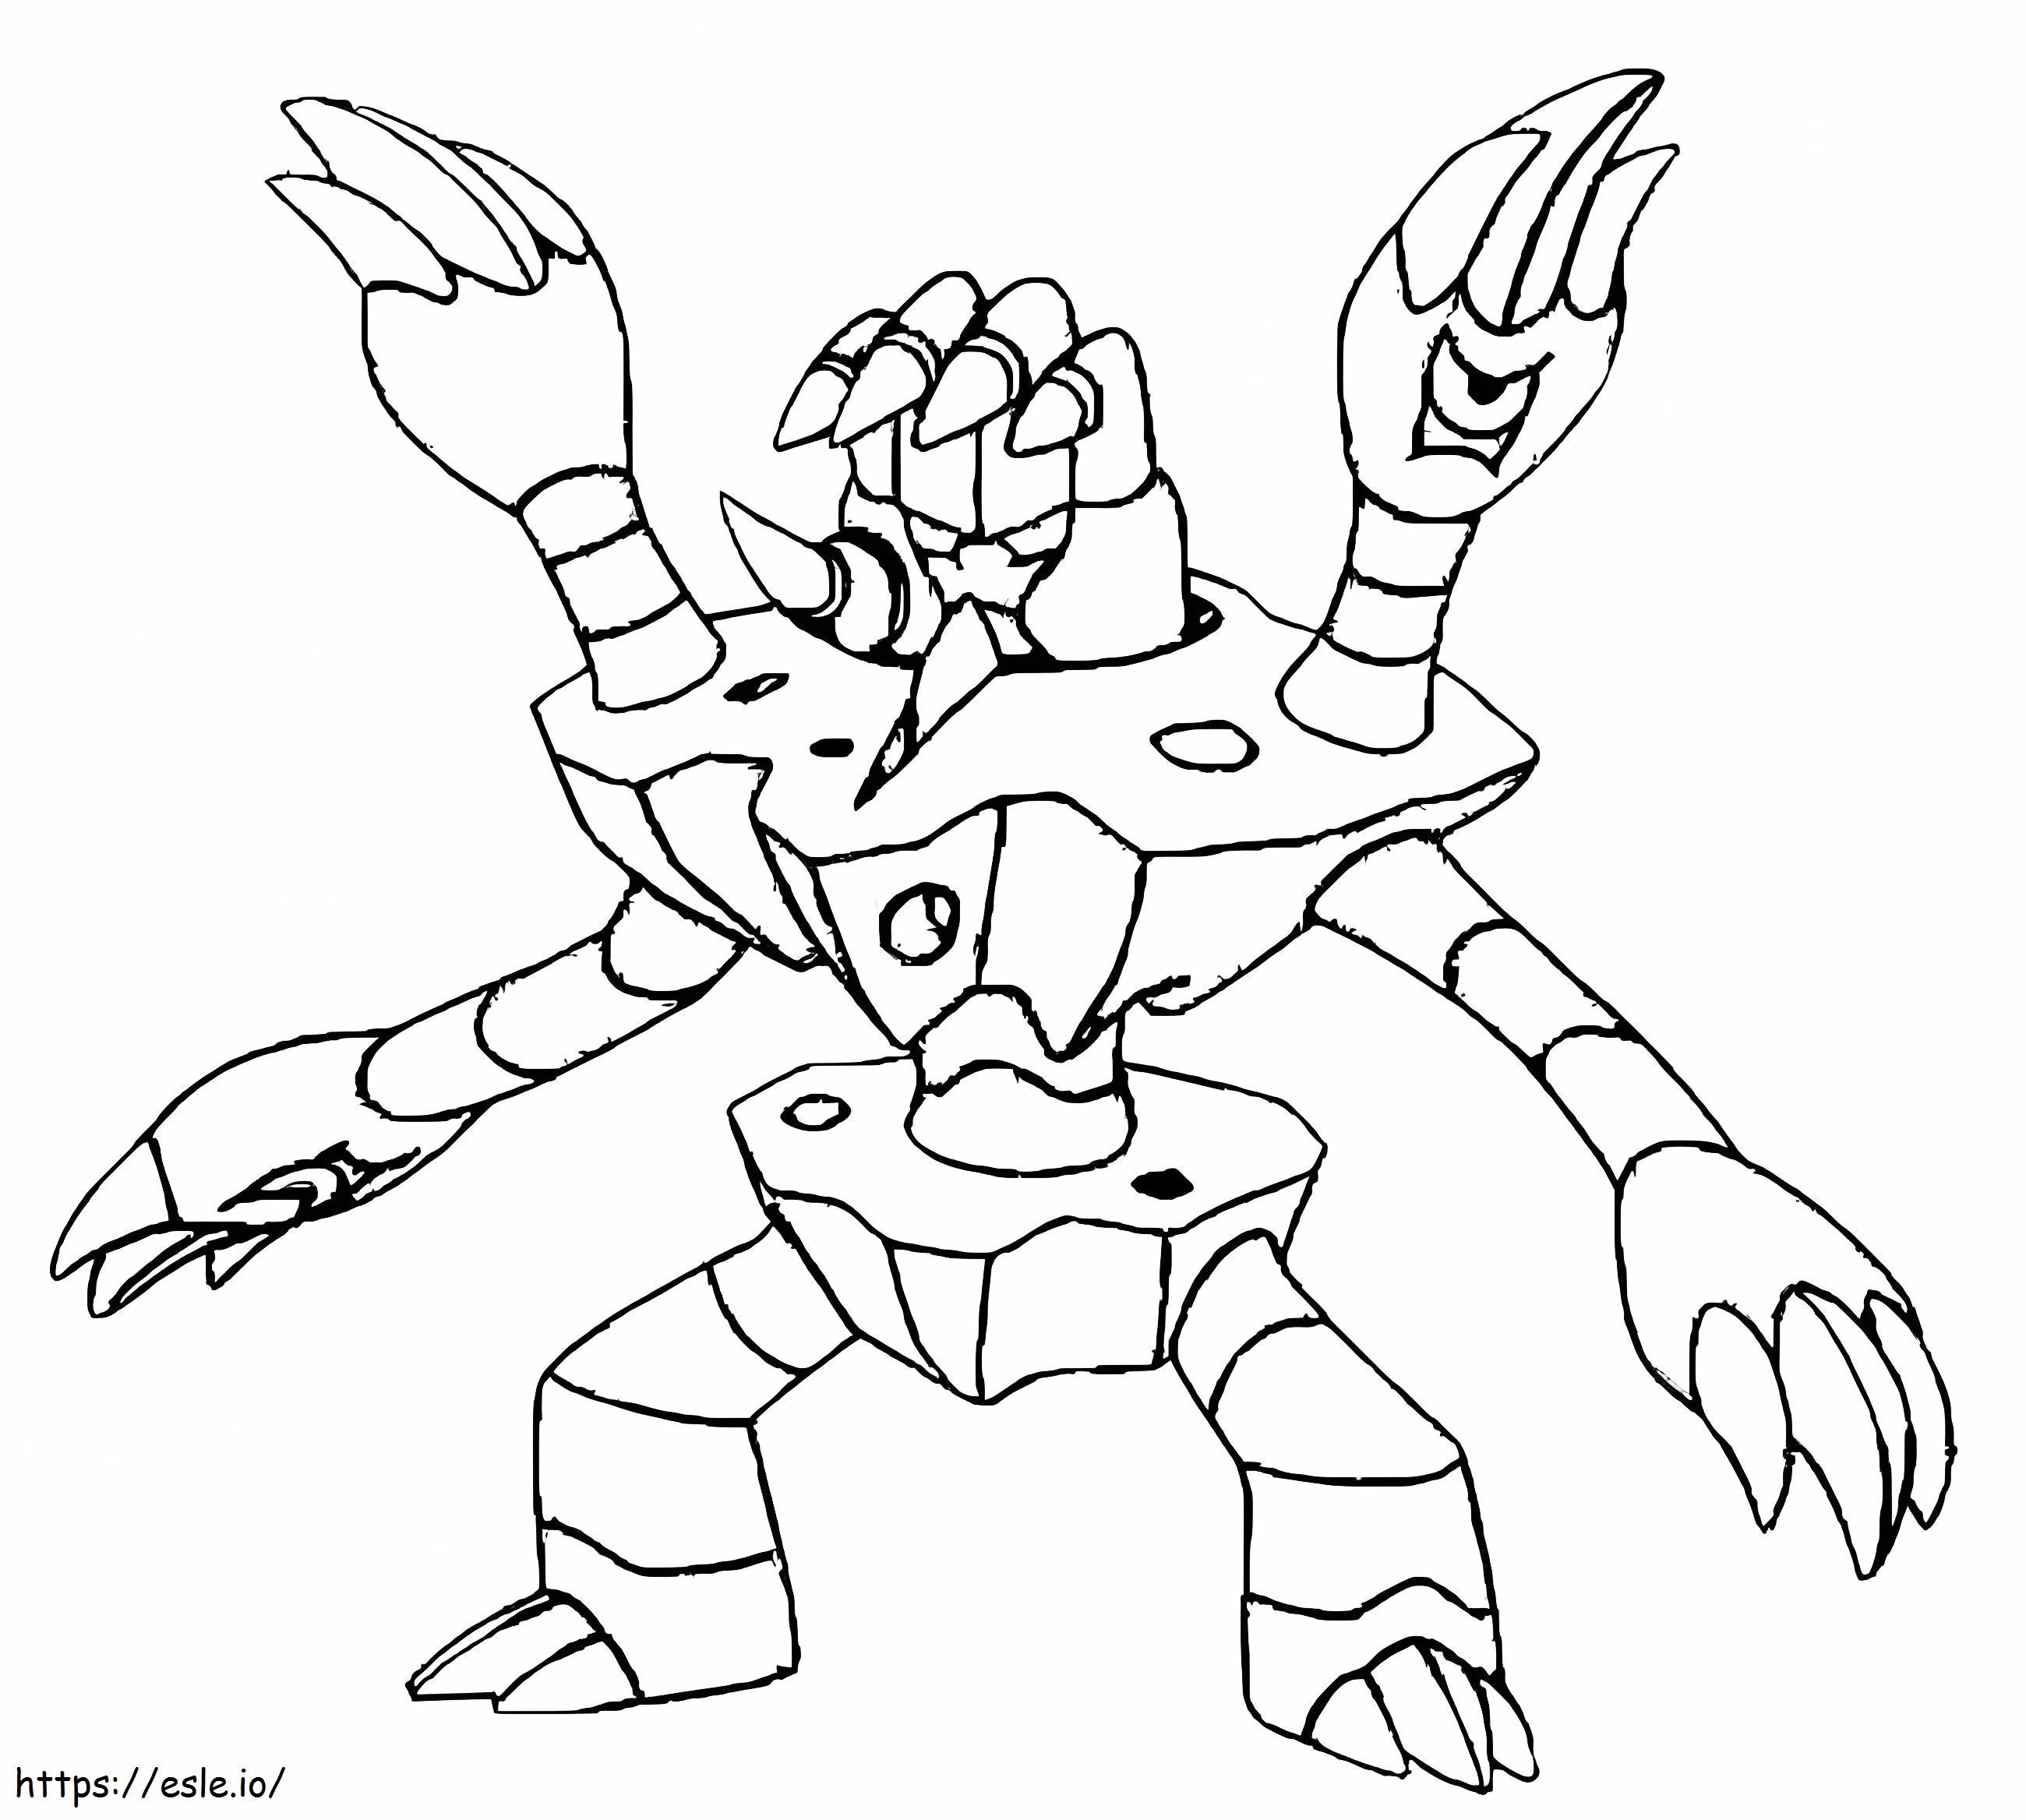 Barbaracle Gen 6 Pokemon coloring page